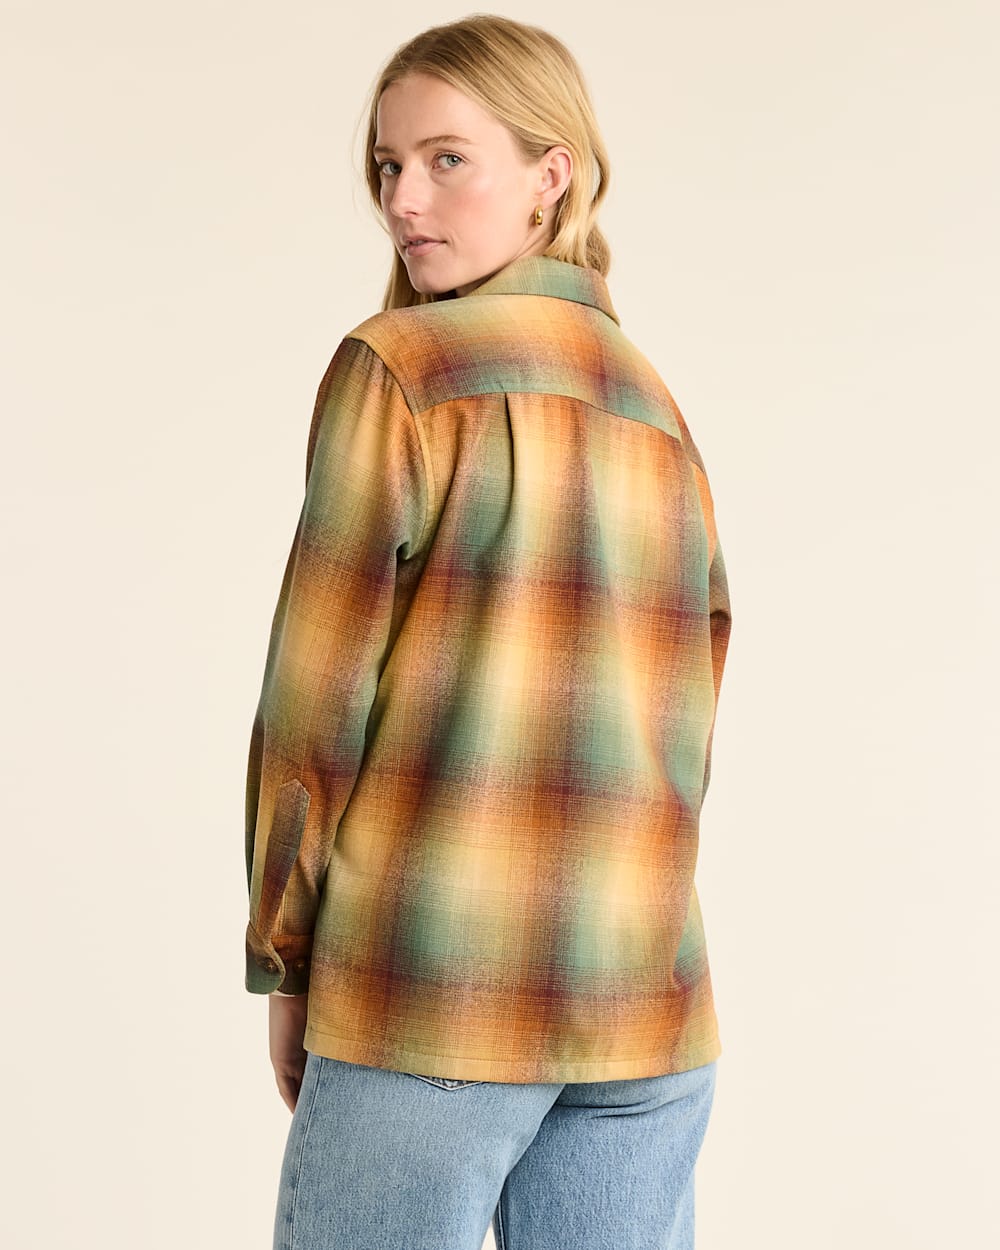 ALTERNATE VIEW OF WOMEN'S PLAID BOYFRIEND BOARD SHIRT IN GOLD/GREEN OMBRE image number 3